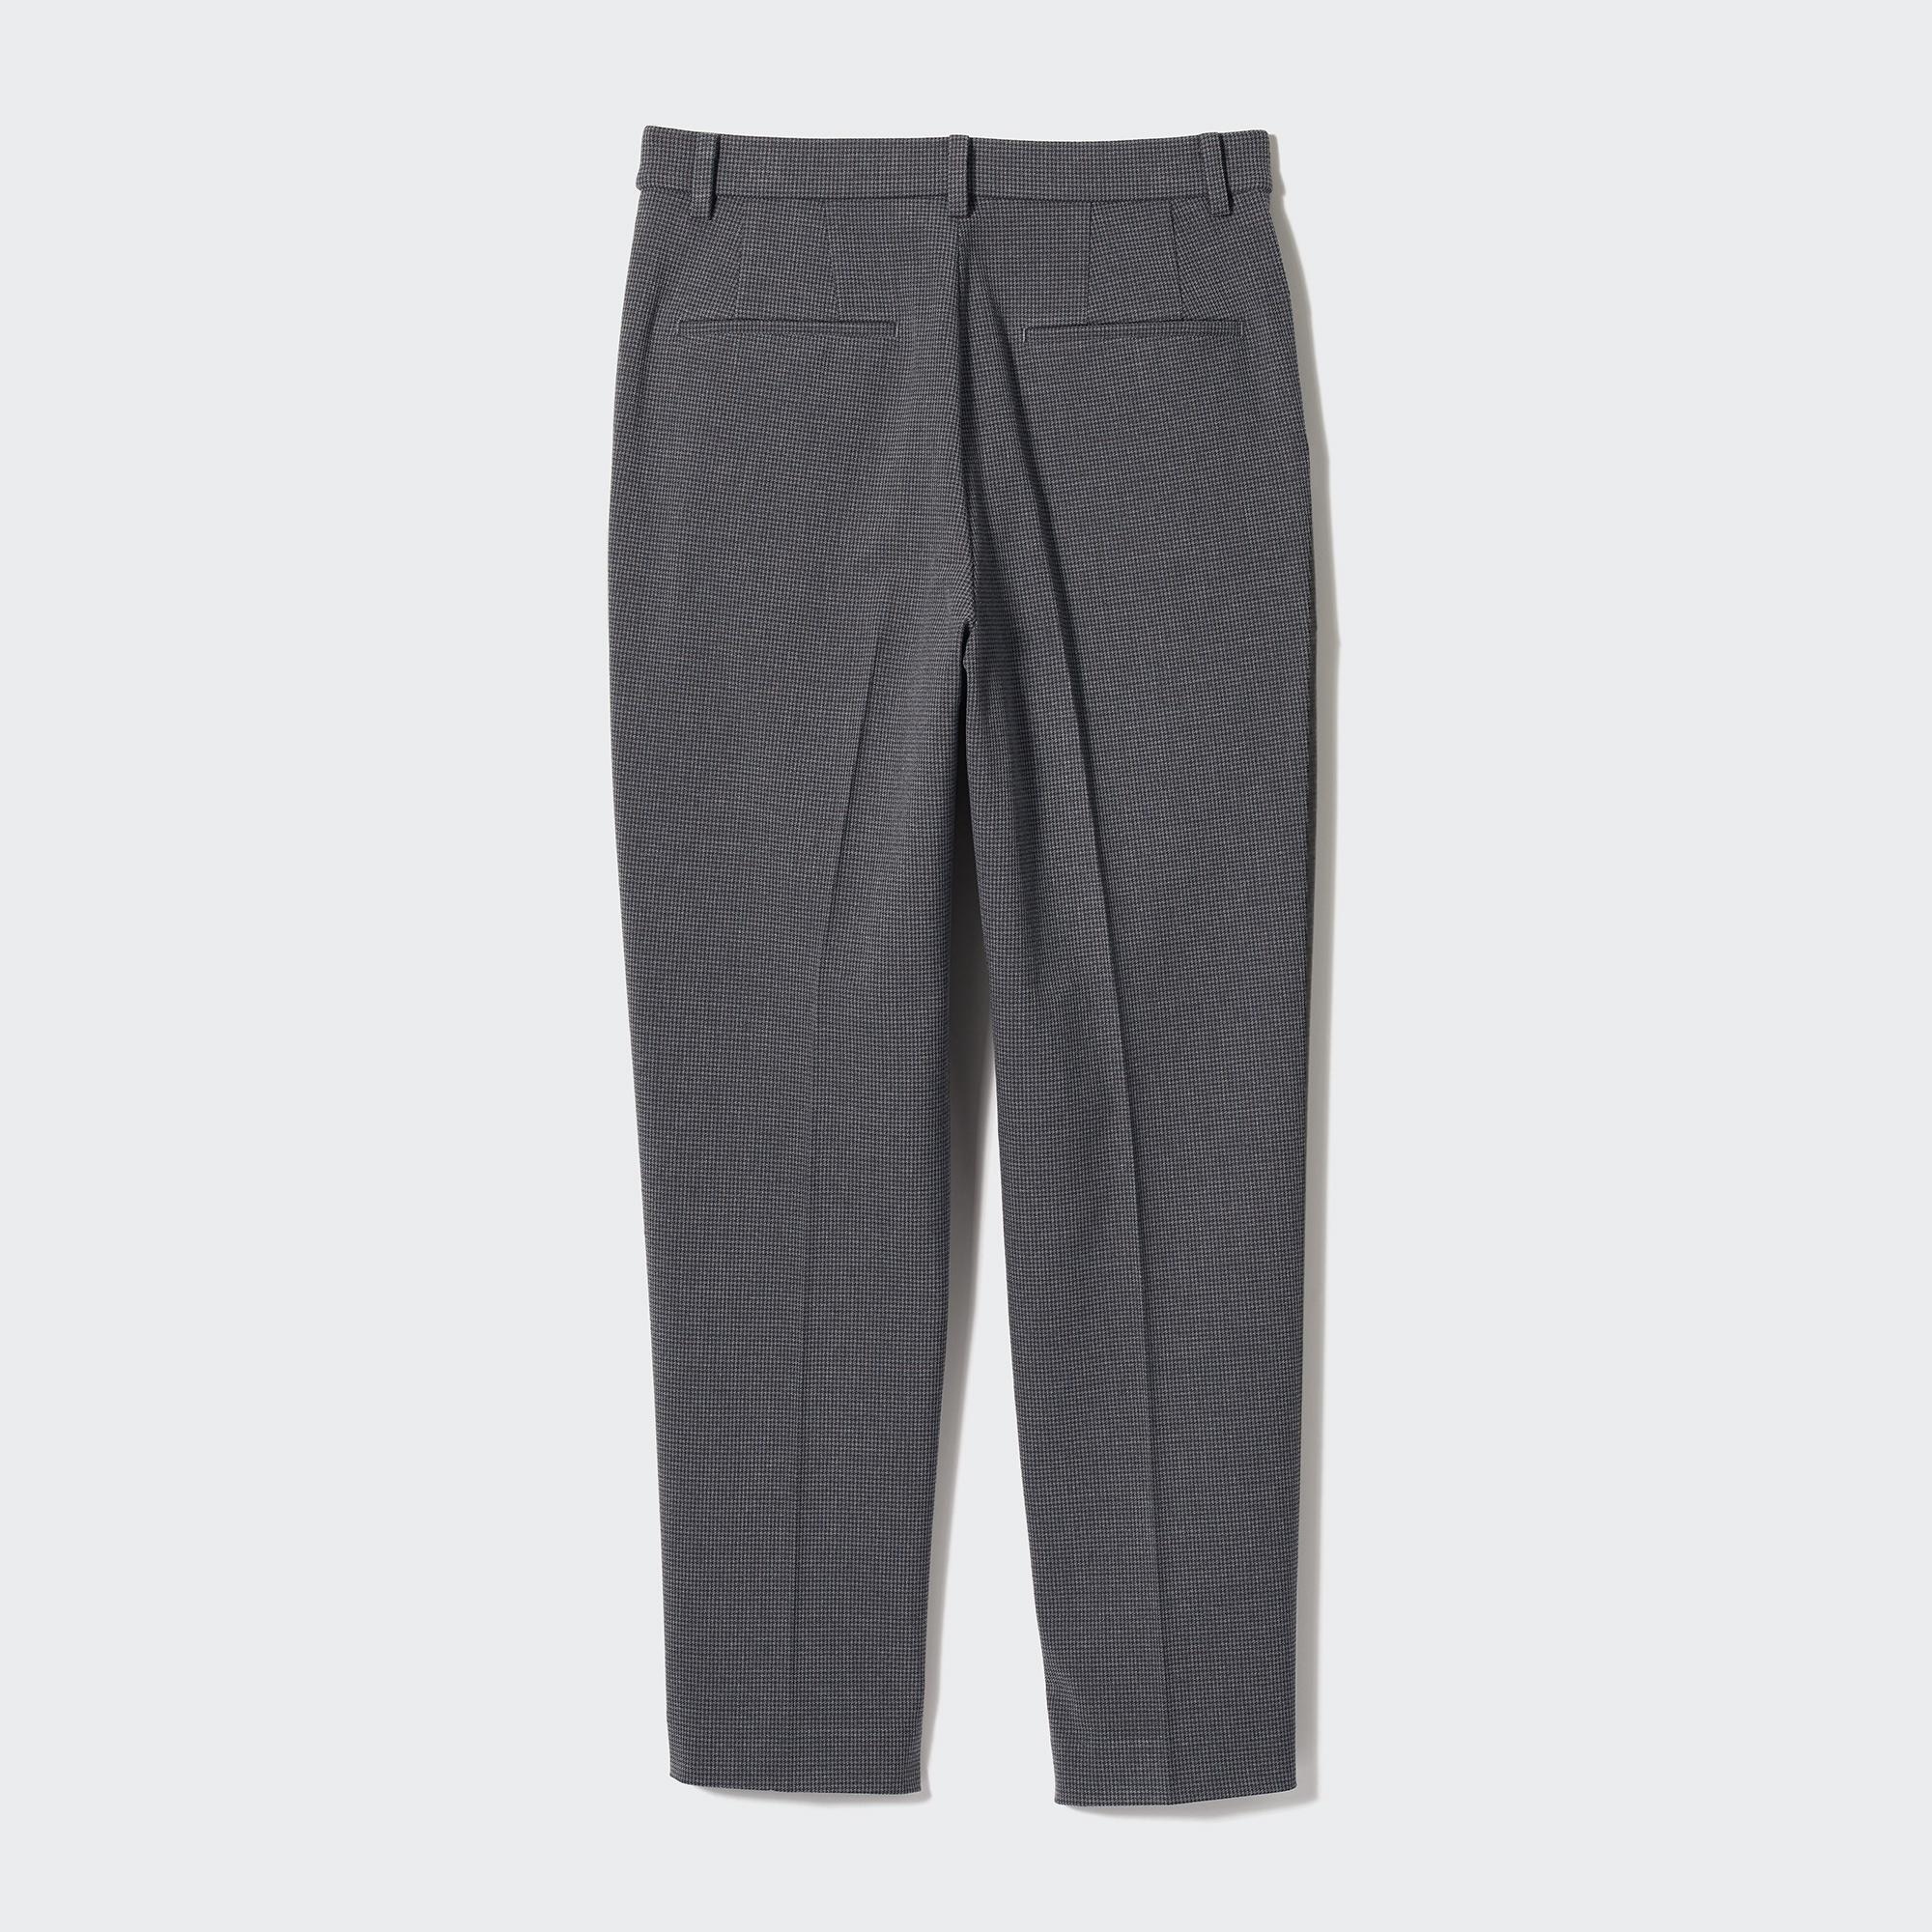 Smart Ankle Pants (2-Way Stretch, Checked)